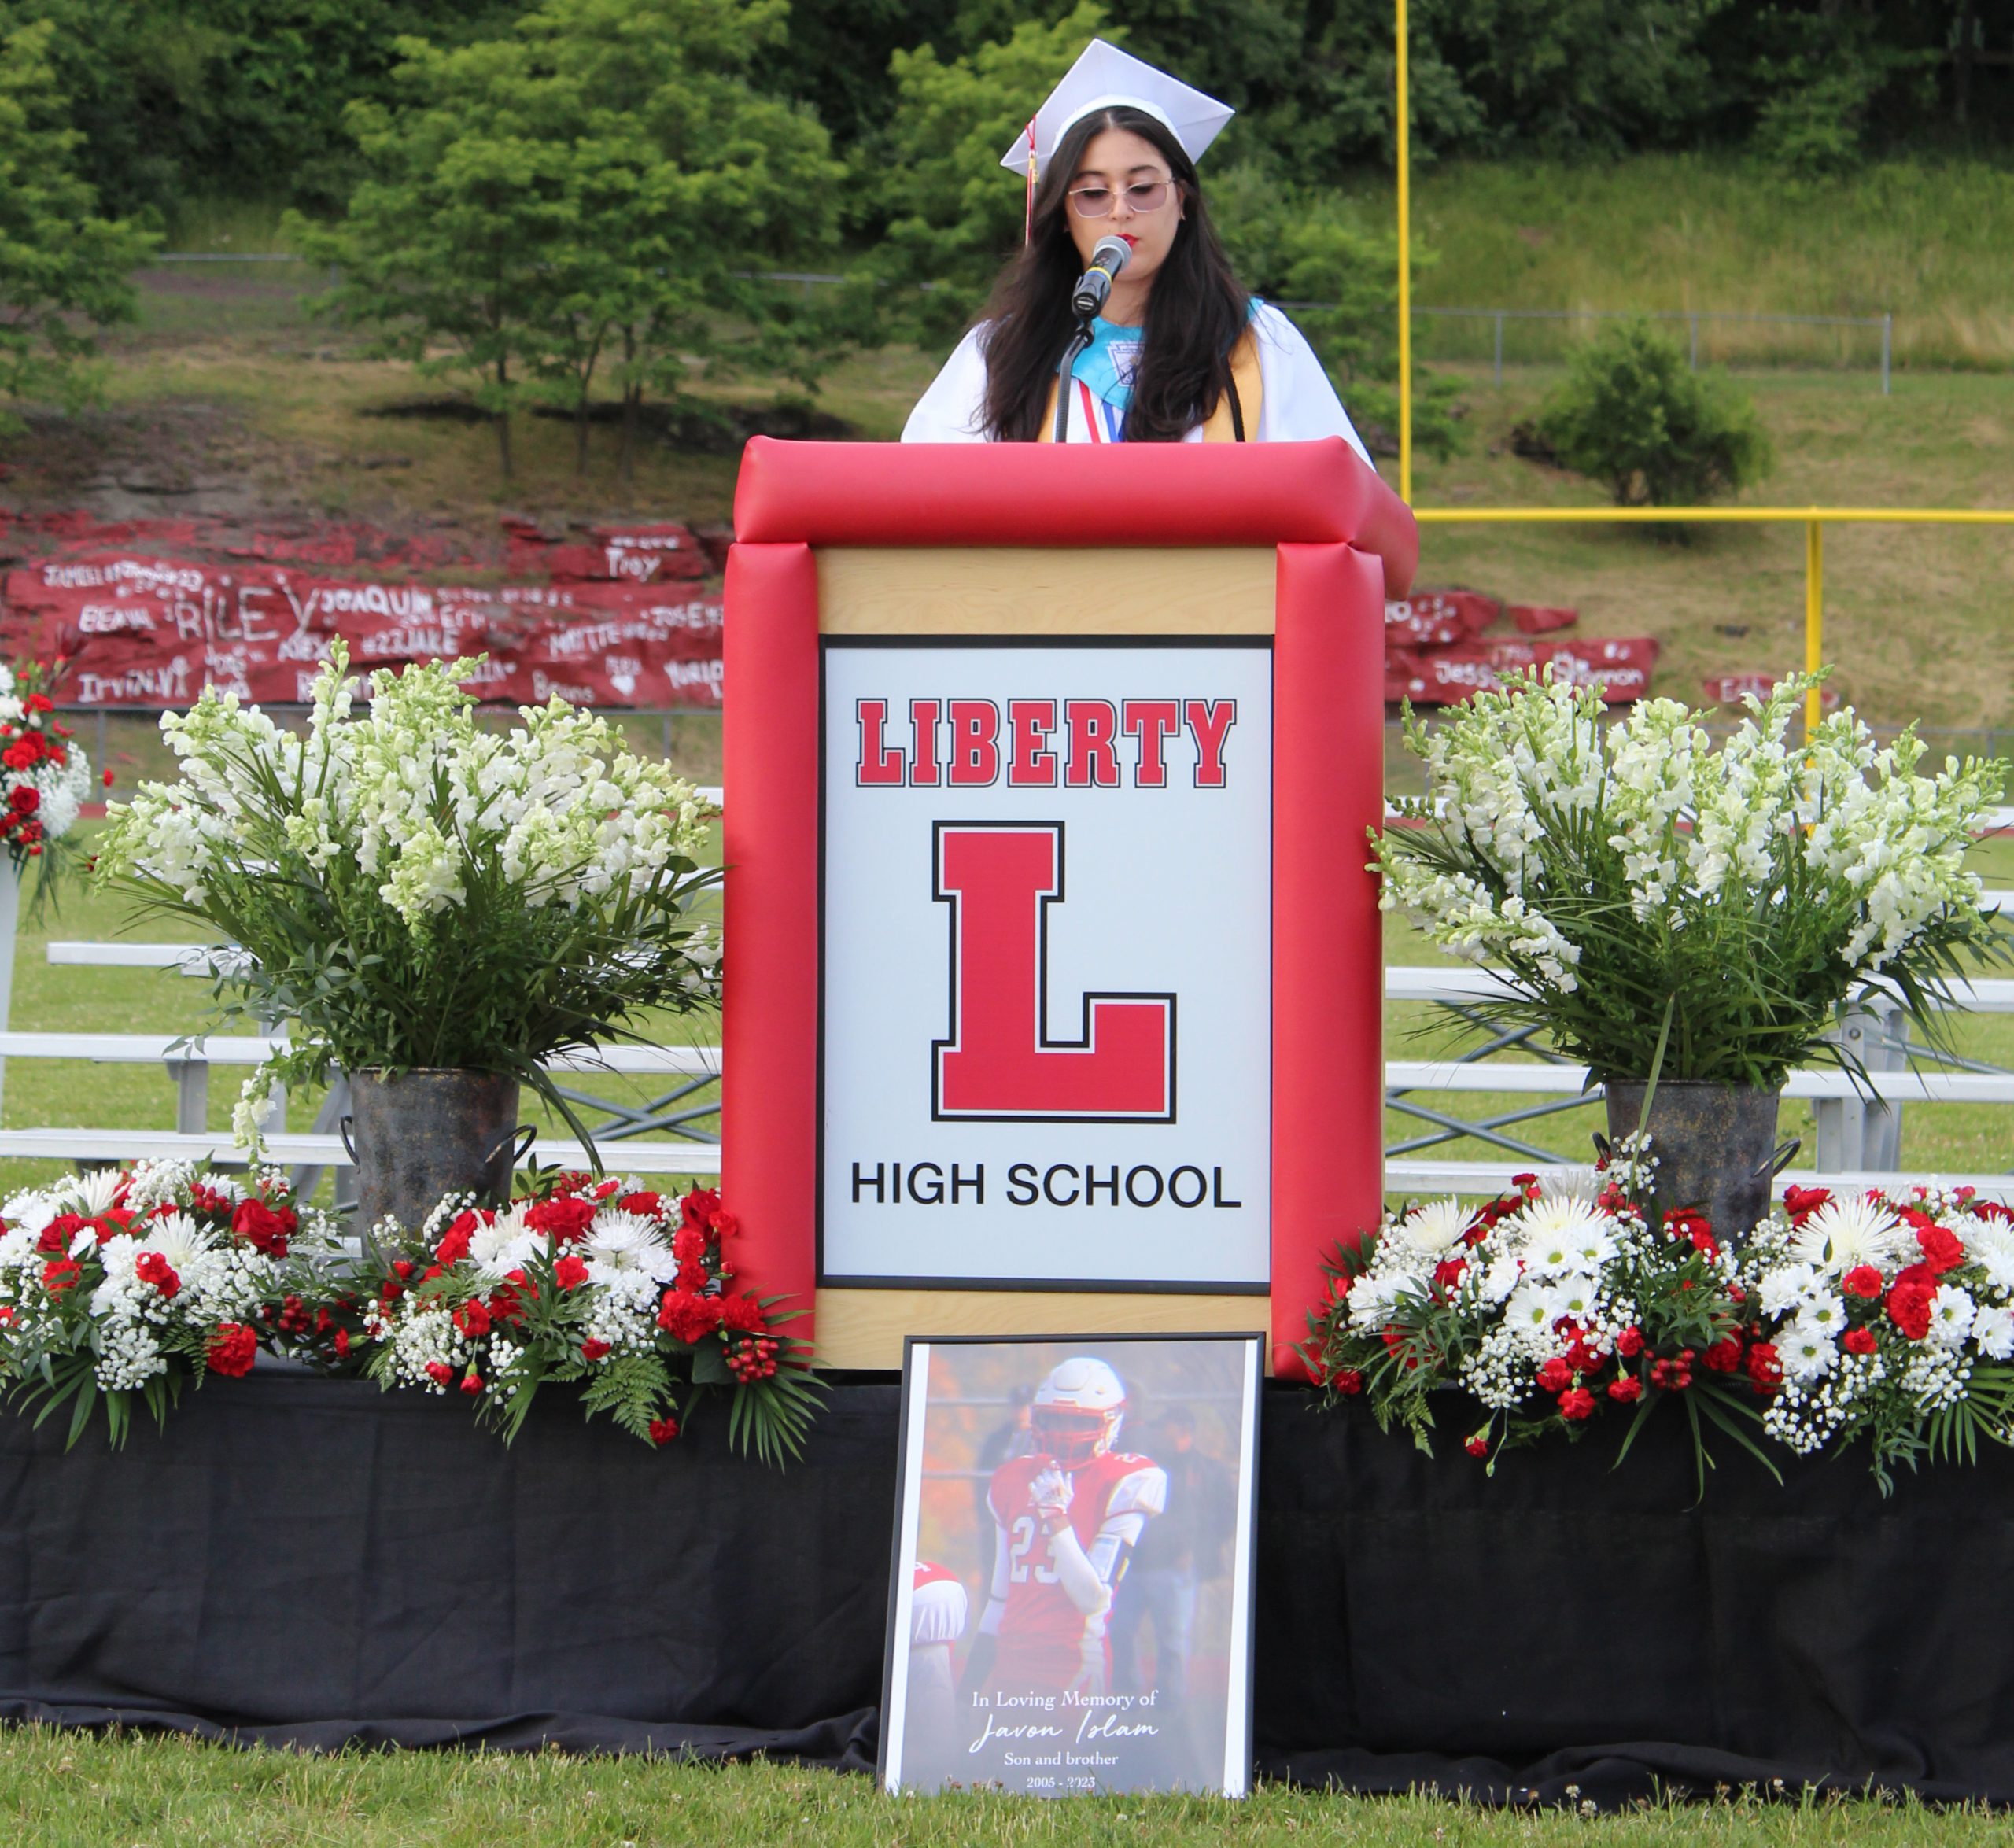 A graduate speaks at a podium with a framed photo of a classmate sitting below the podium.